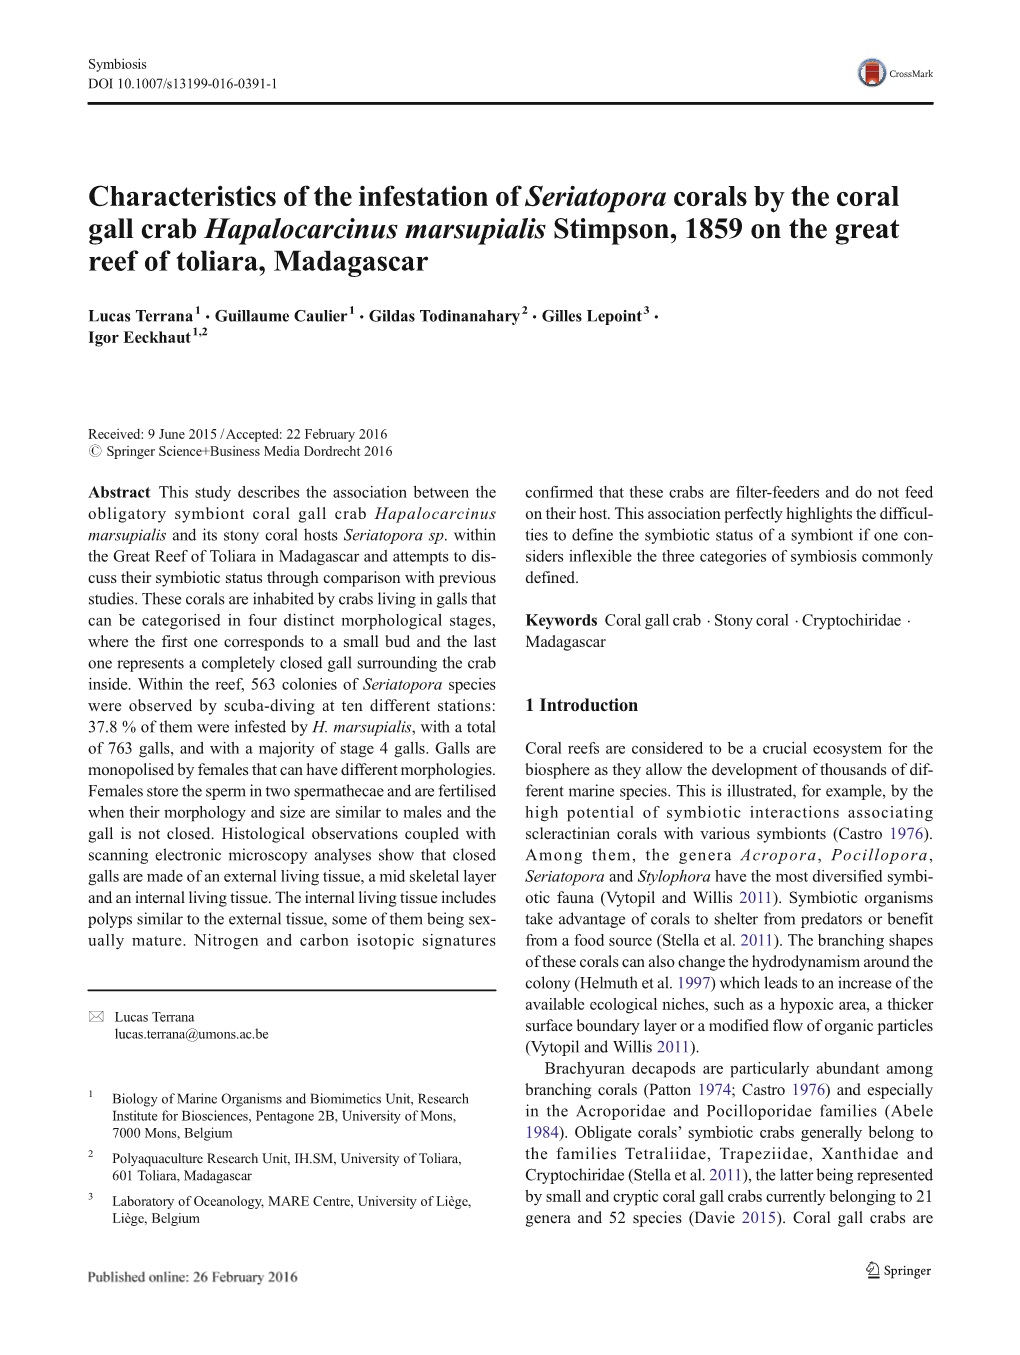 Characteristics of the Infestation of Seriatopora Corals by the Coral Gall Crab Hapalocarcinus Marsupialis Stimpson, 1859 on the Great Reef of Toliara, Madagascar